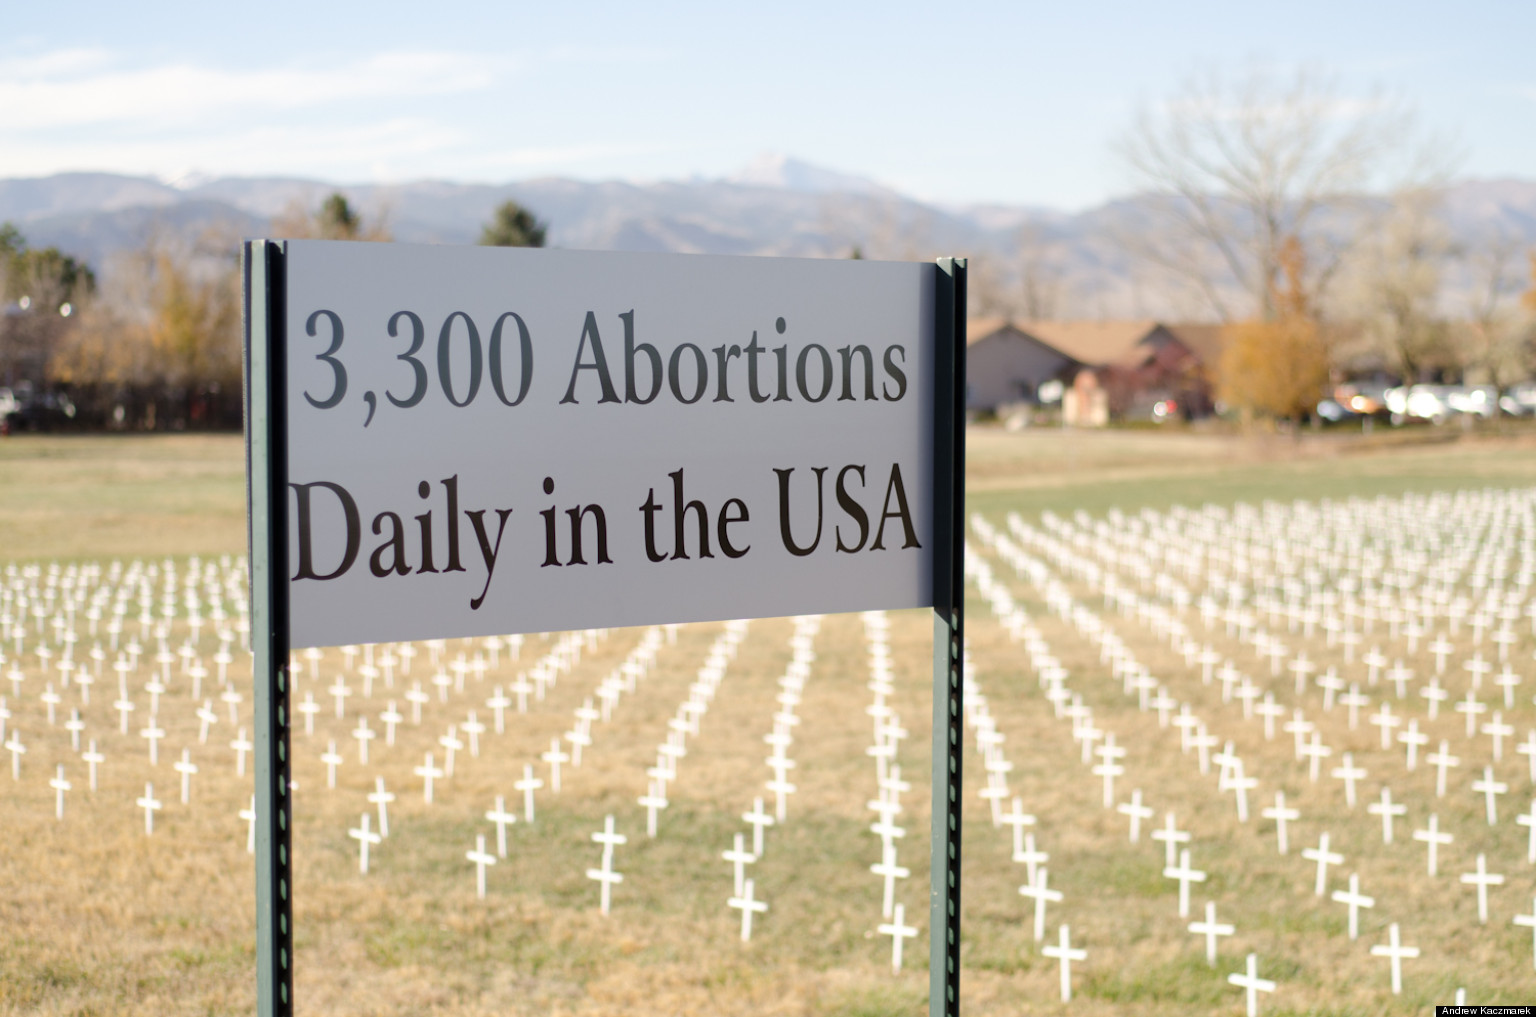 Sacred Heart Of Mary Church In Boulder Leaves Anti-Abortion Display Up